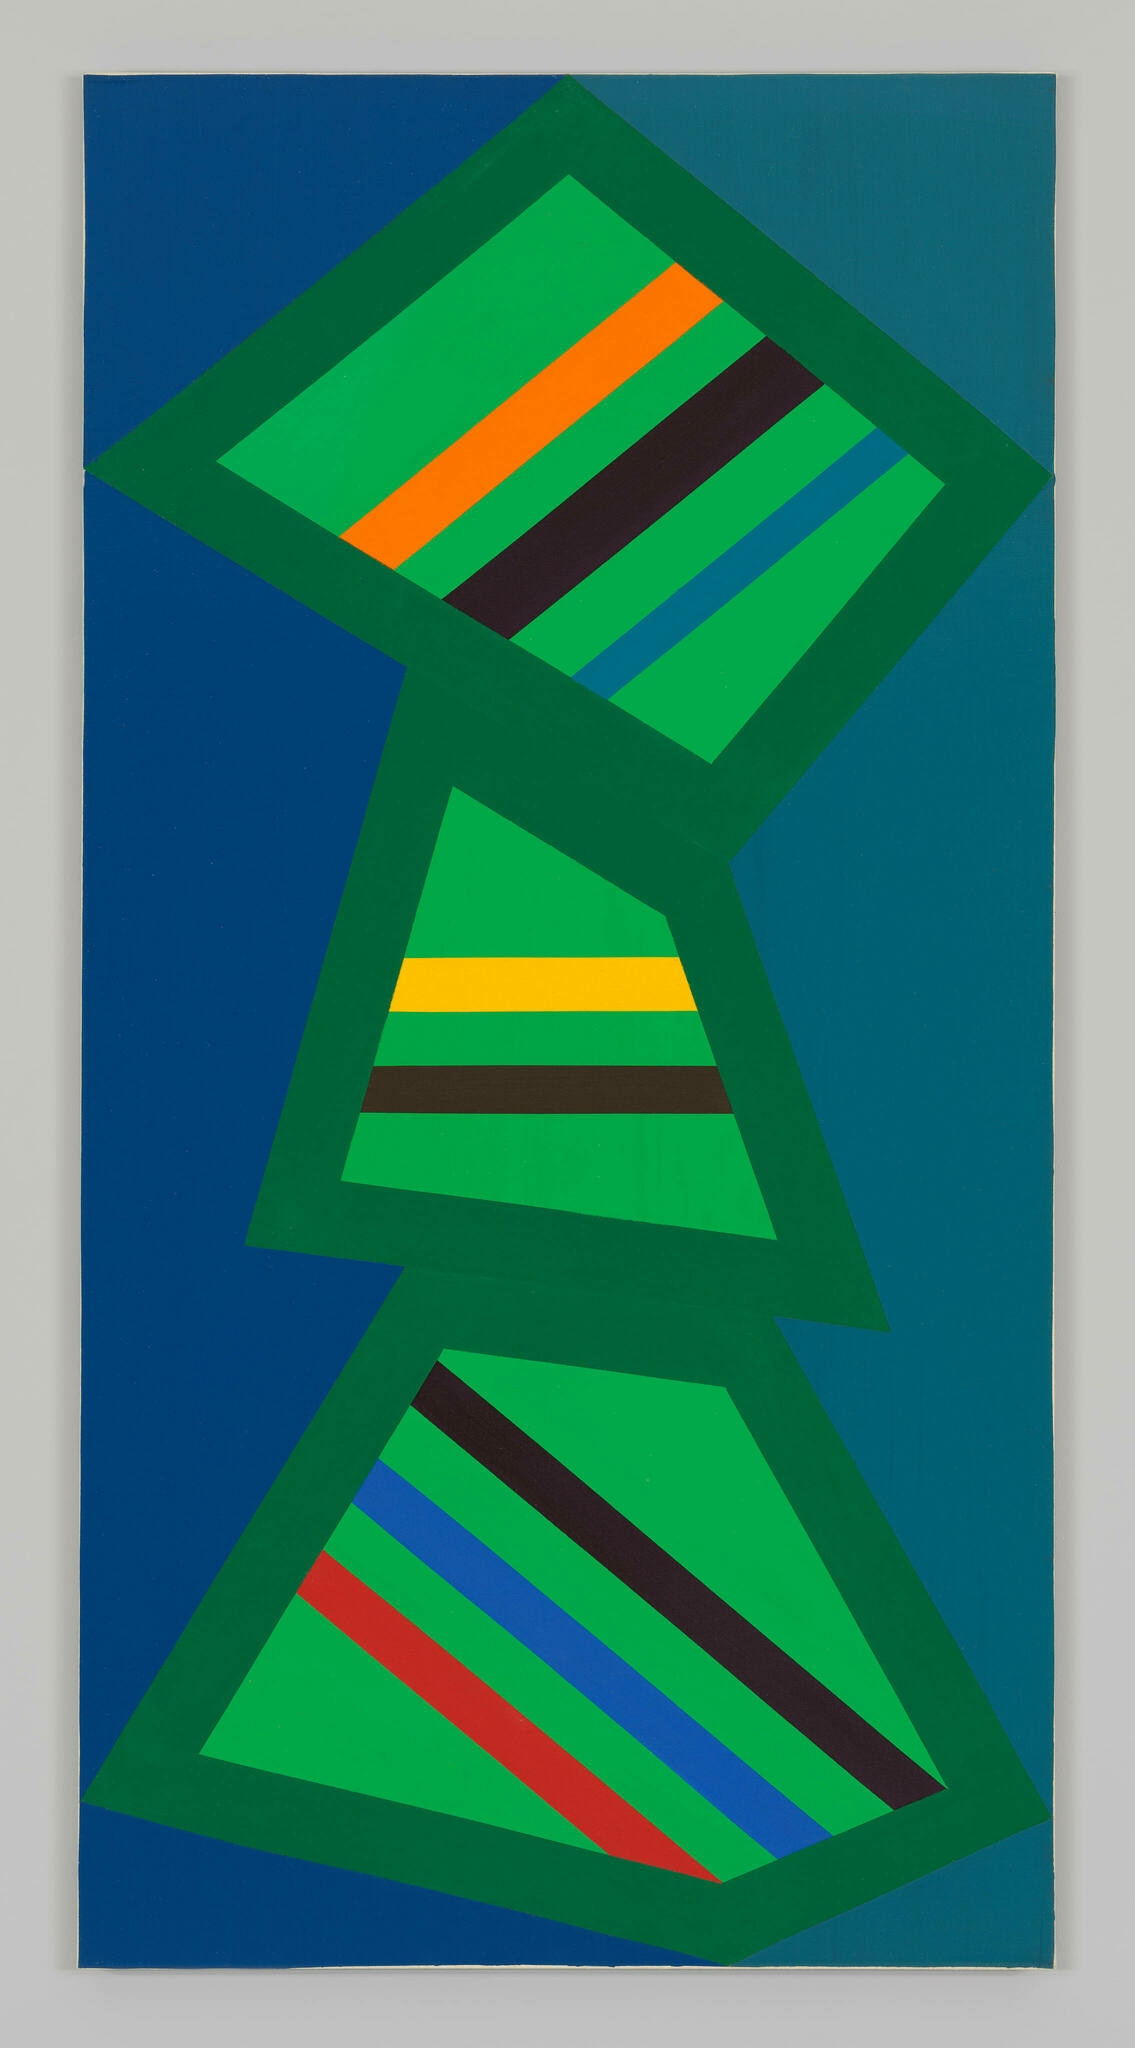   Three green geometric shapes with lines of bright colors inside are stacked on top of one another on a blue background.